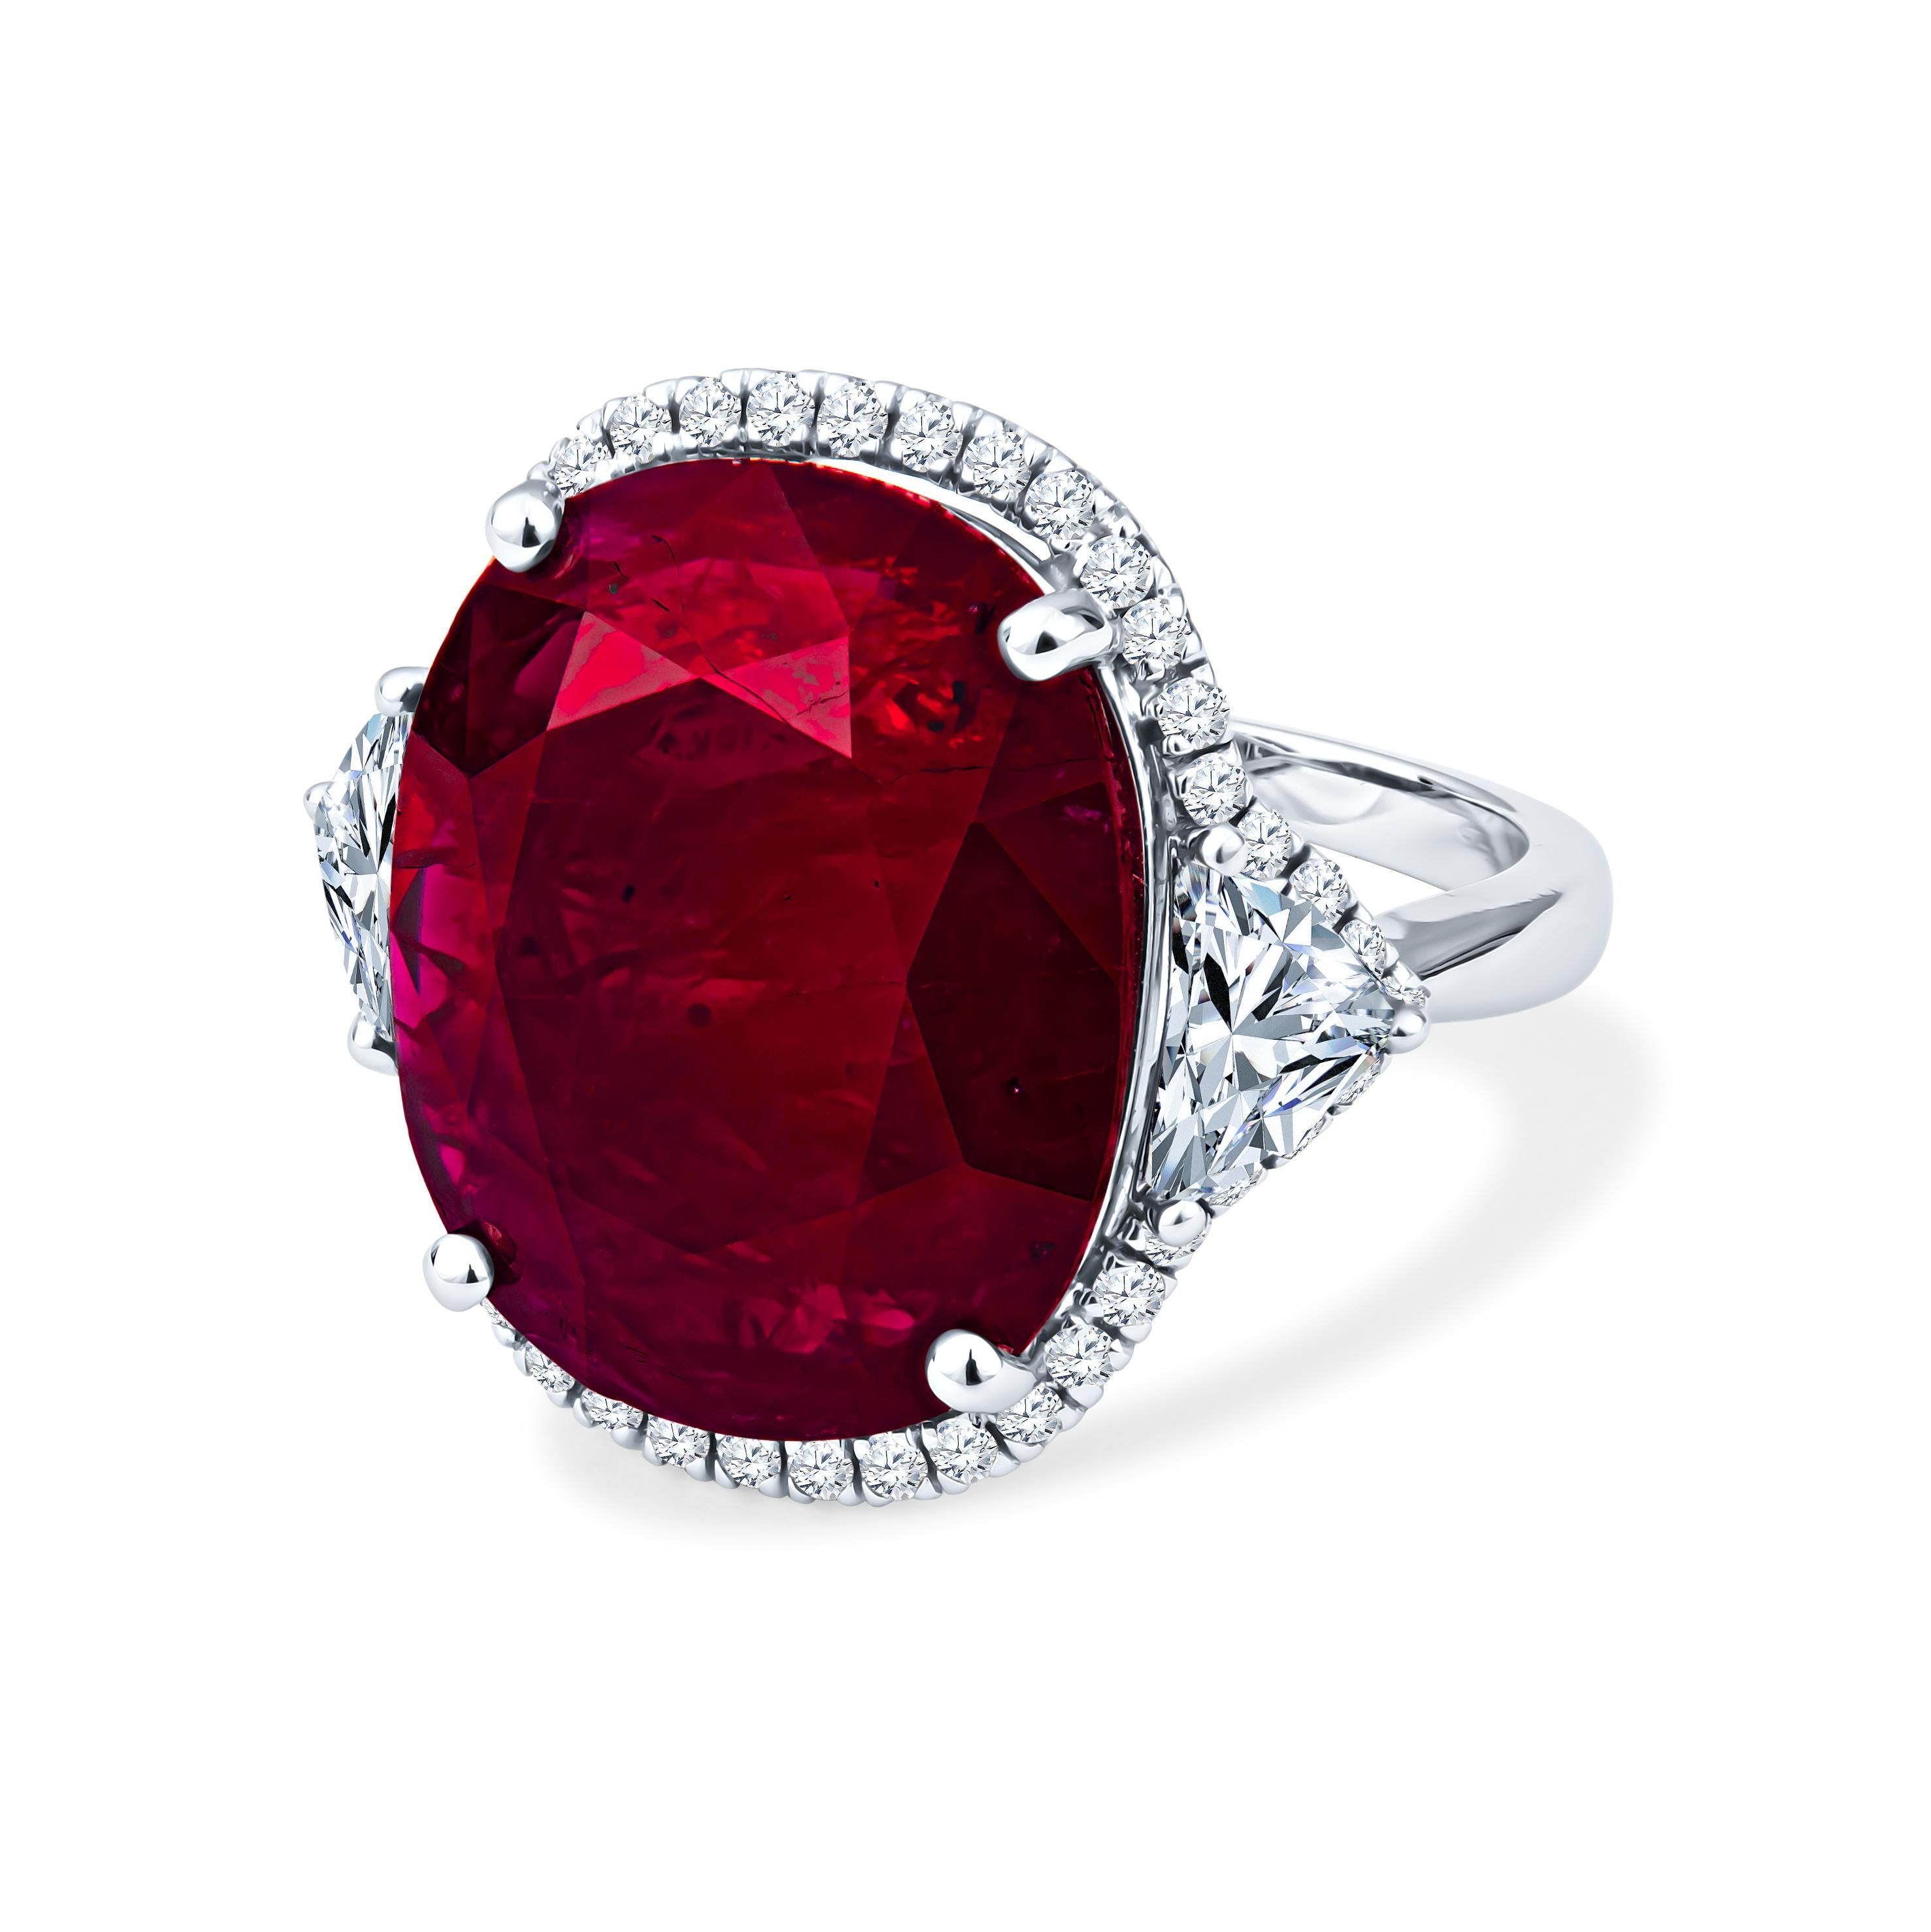 This ring showcases a 13.12ct oval cut natural ruby (standard heat treatment only), surrounded by 0.44ct round diamonds forming a diamond halo and 2 0.82ctw trillion cut diamonds in the sides. The ring is set in 18kt white gold and is a size 6.5,